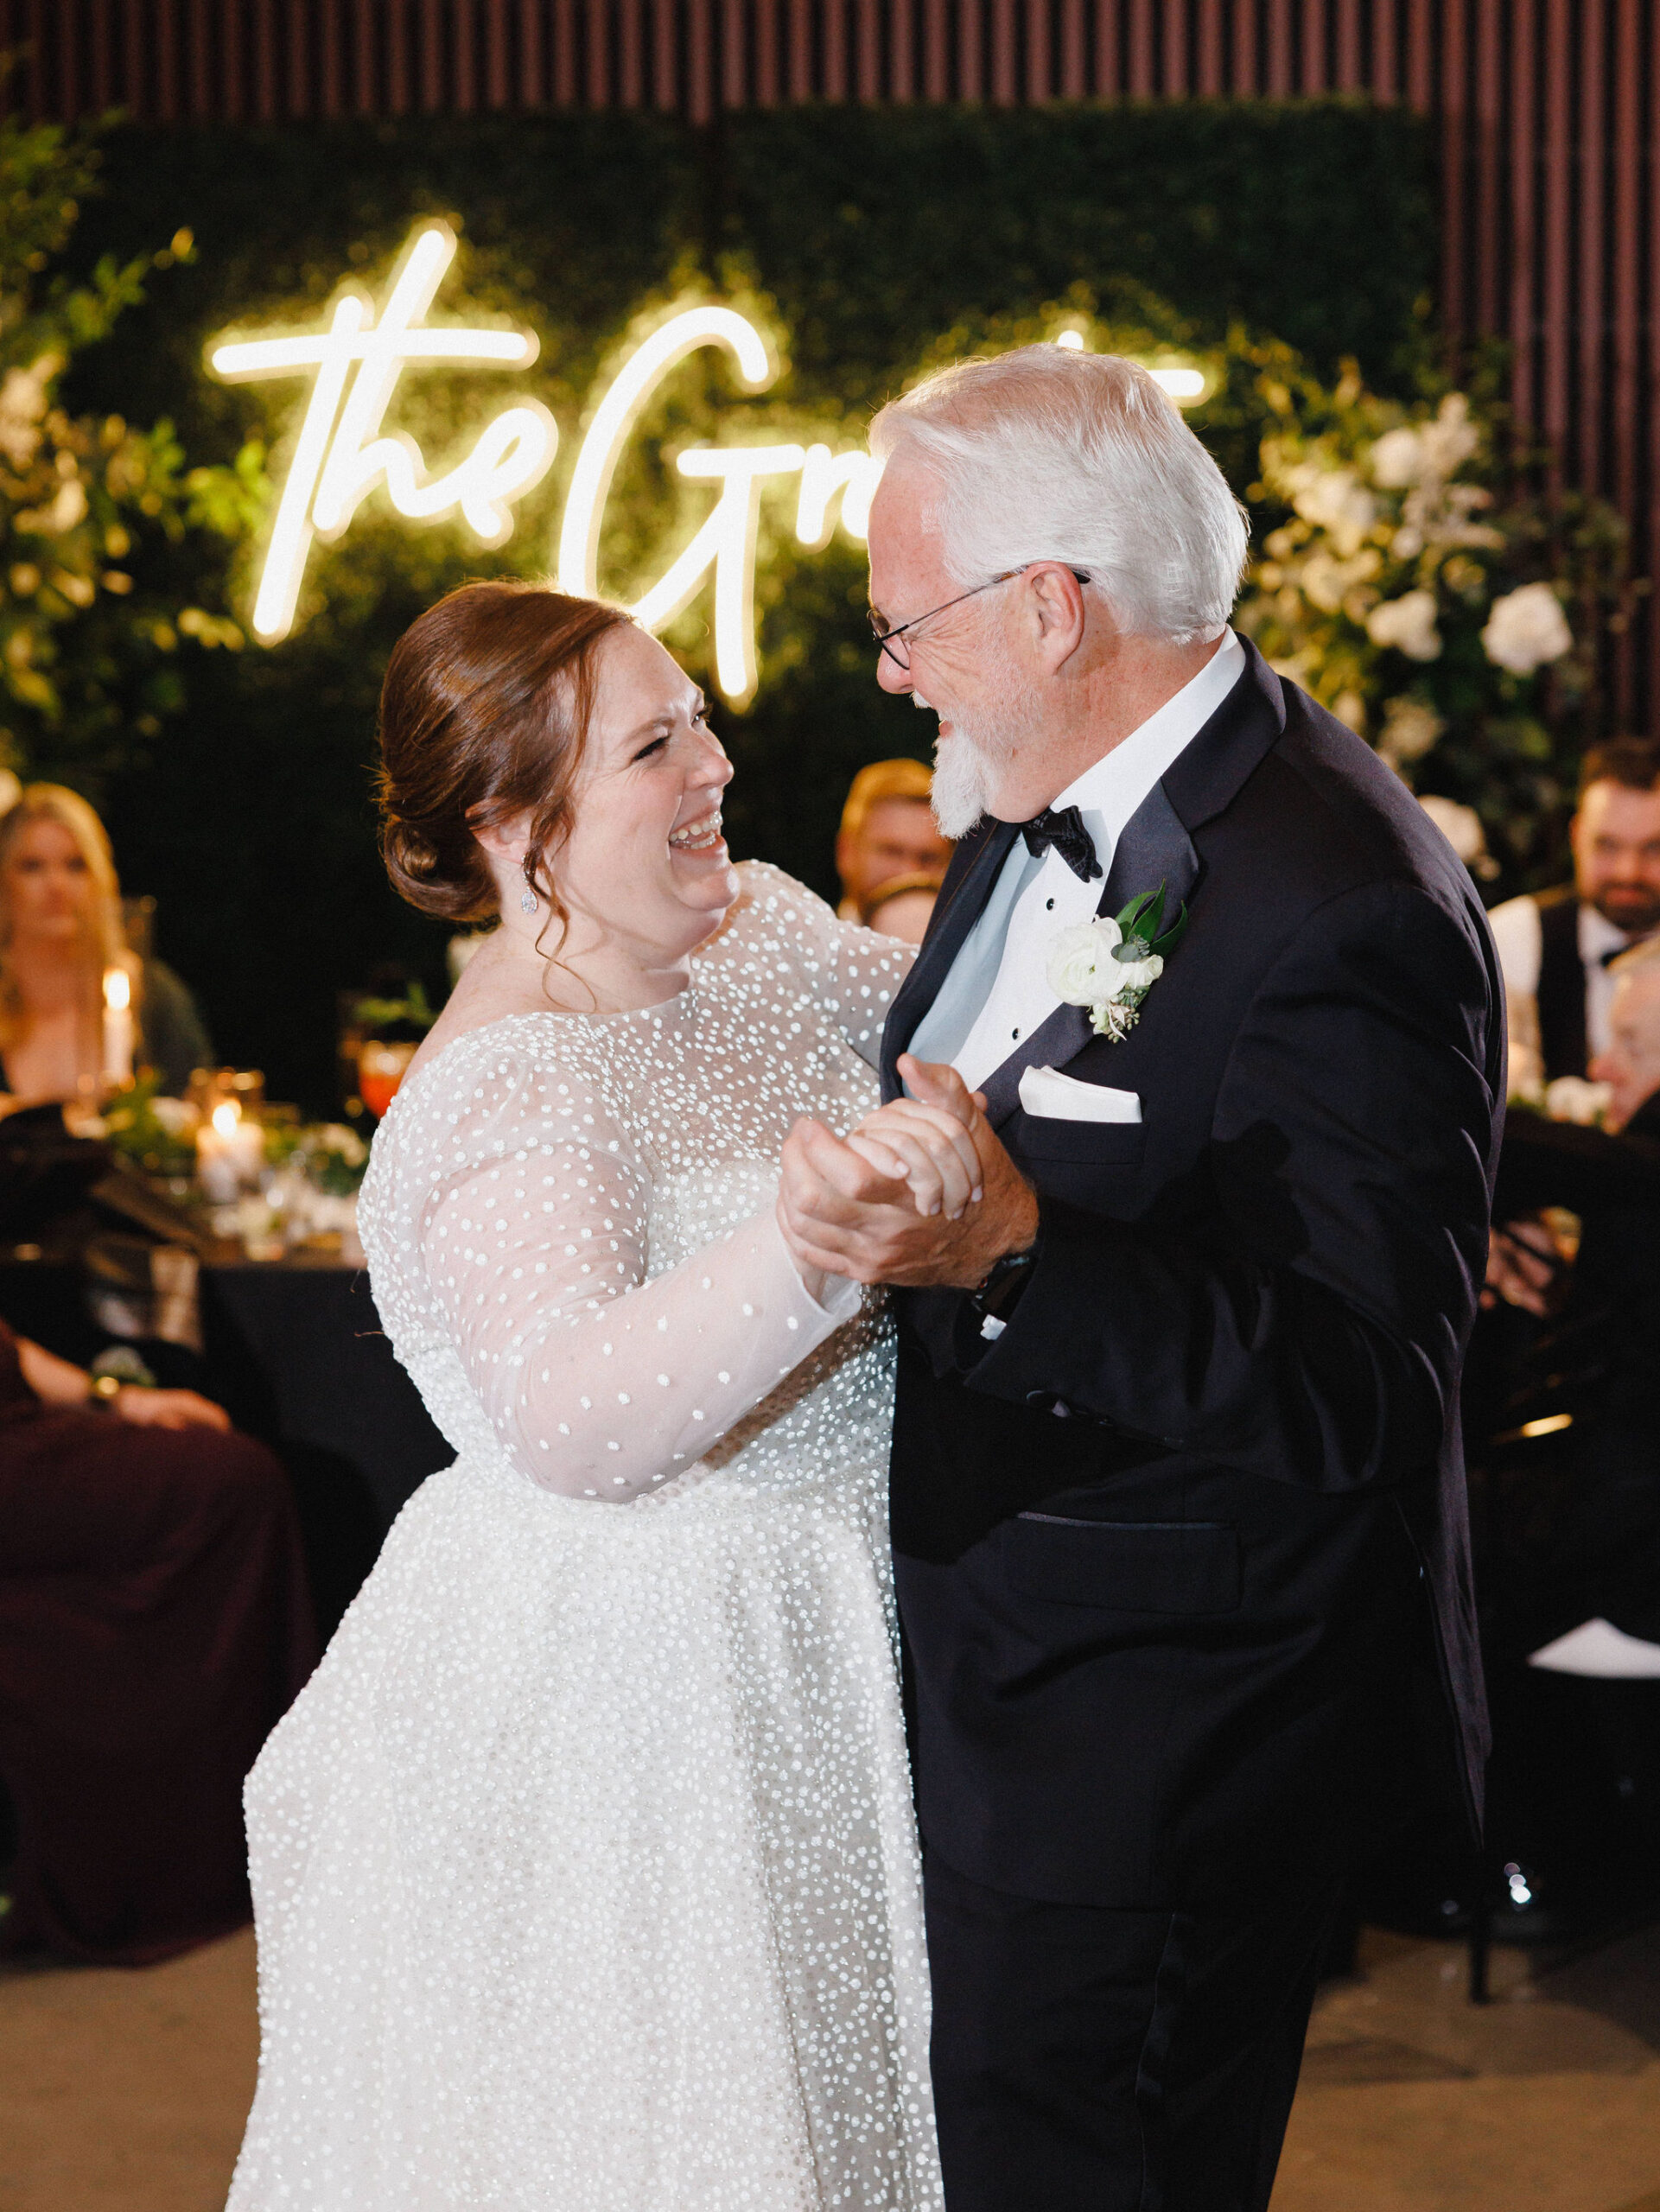 Katie dancing with her father at her wedding